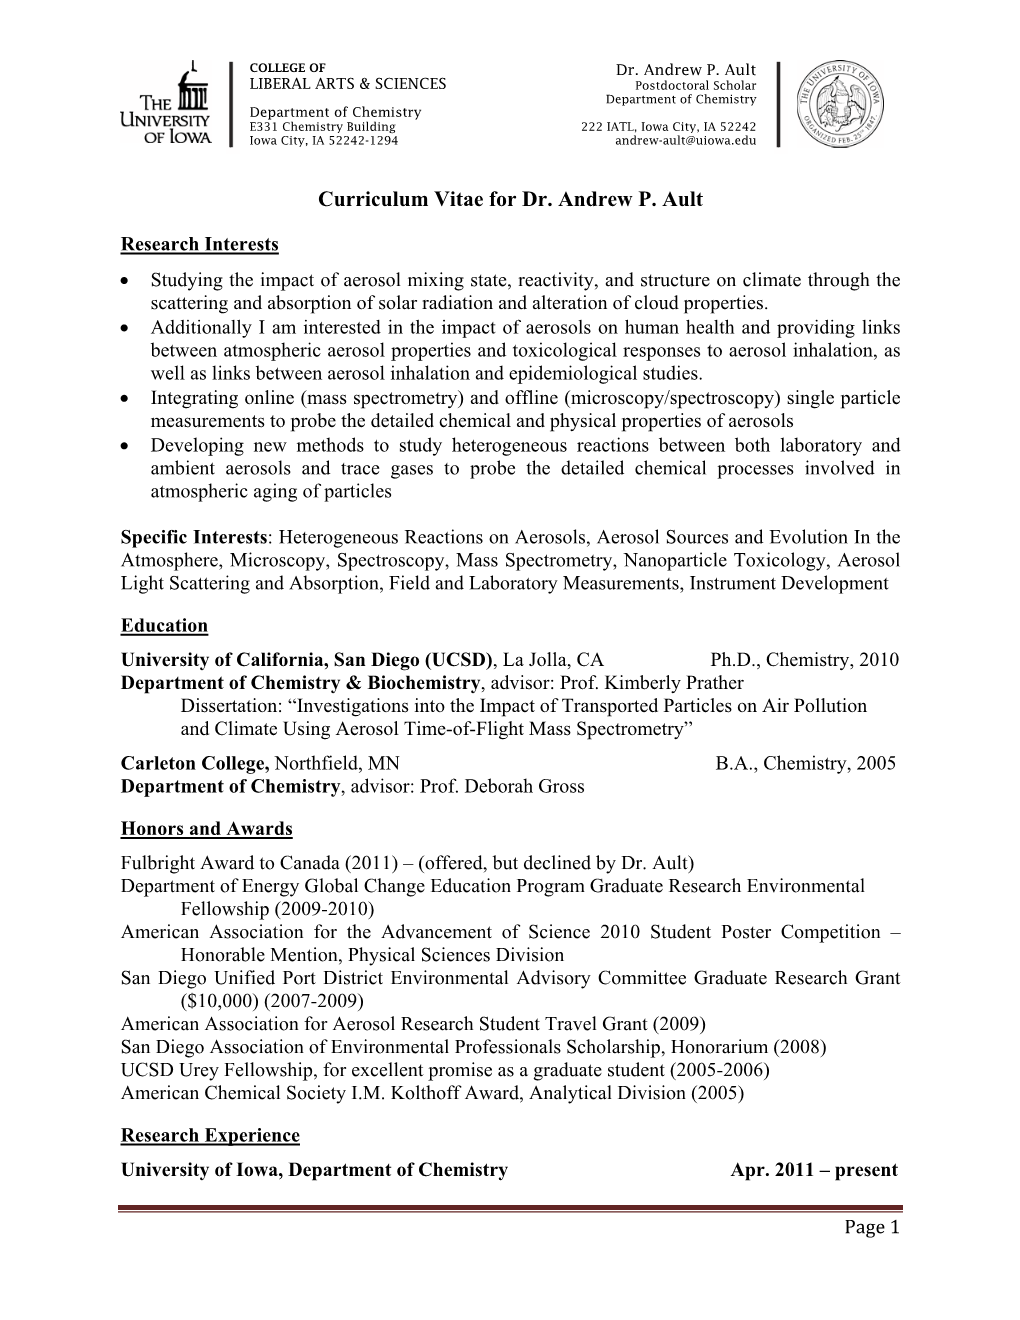 Curriculum Vitae for Dr. Andrew P. Ault